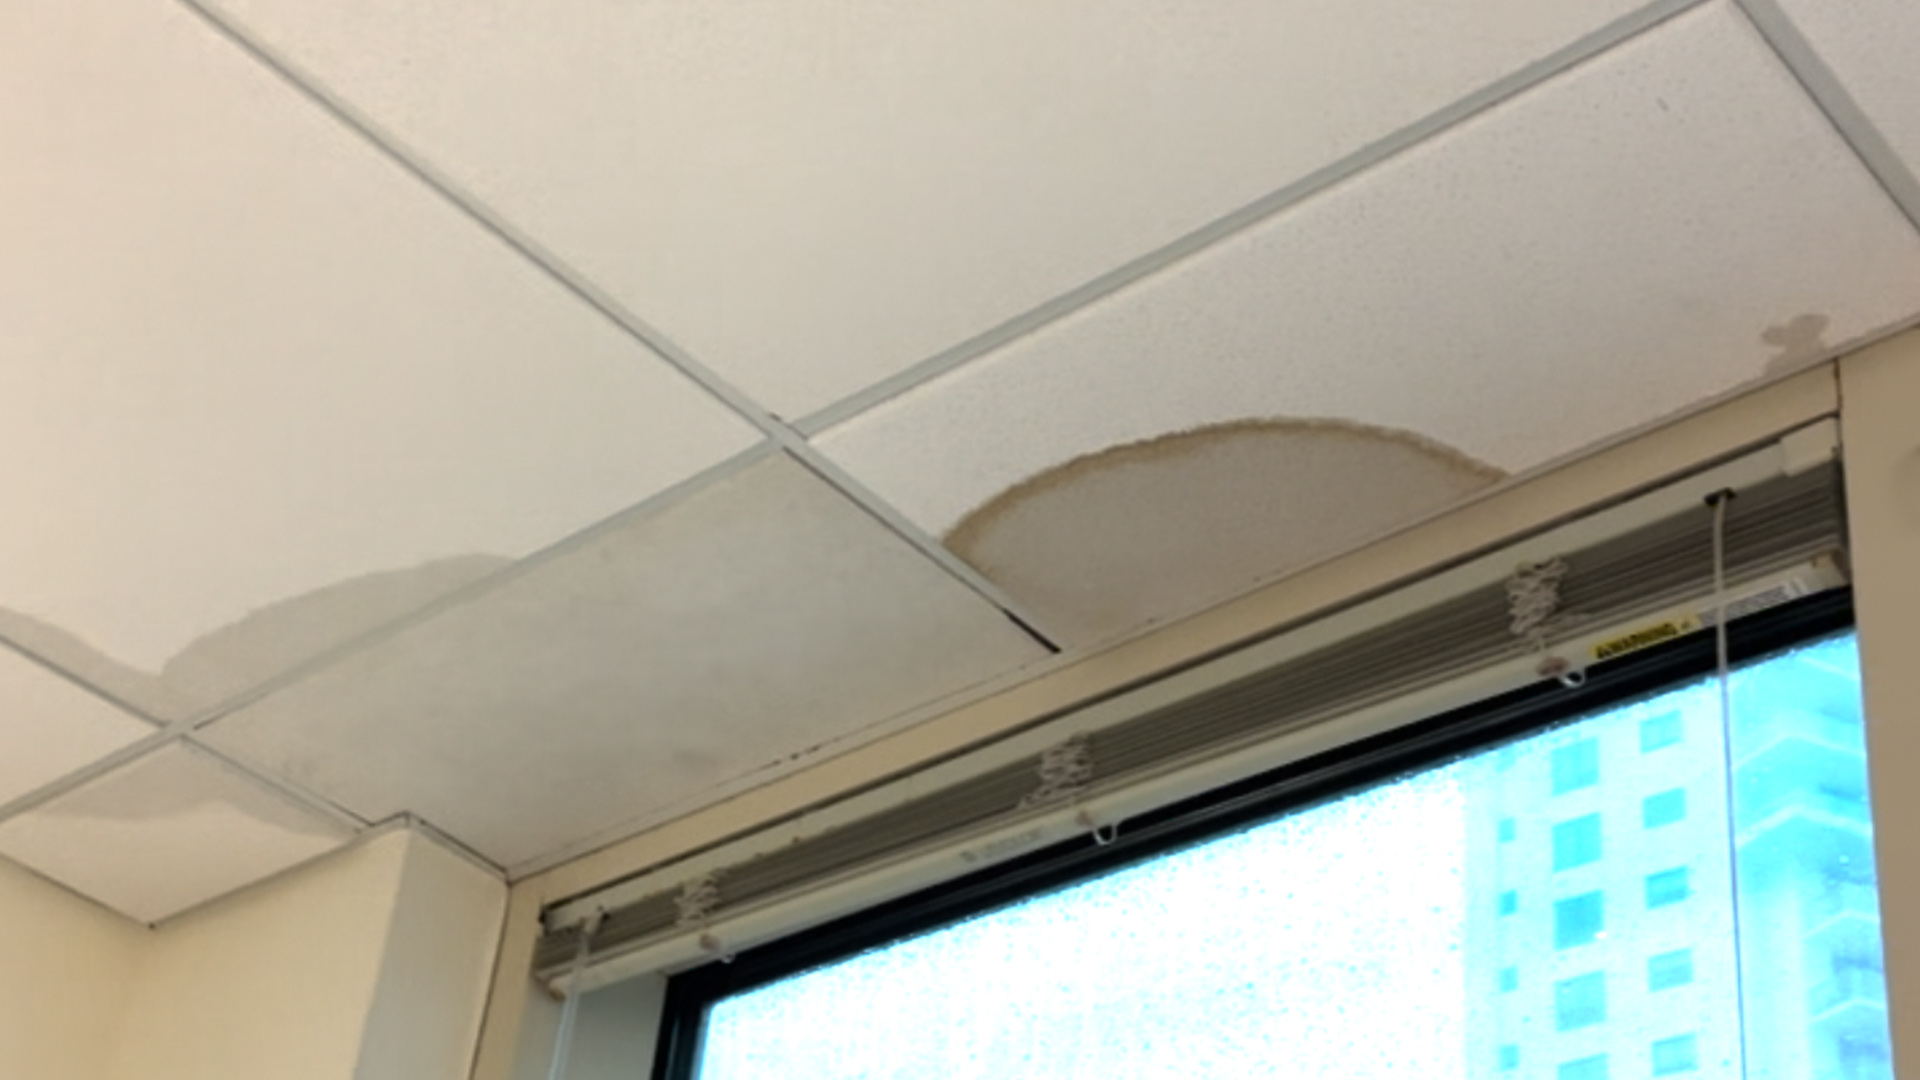 Water Intrusion Property Damage Claims in Fort Lauderdale